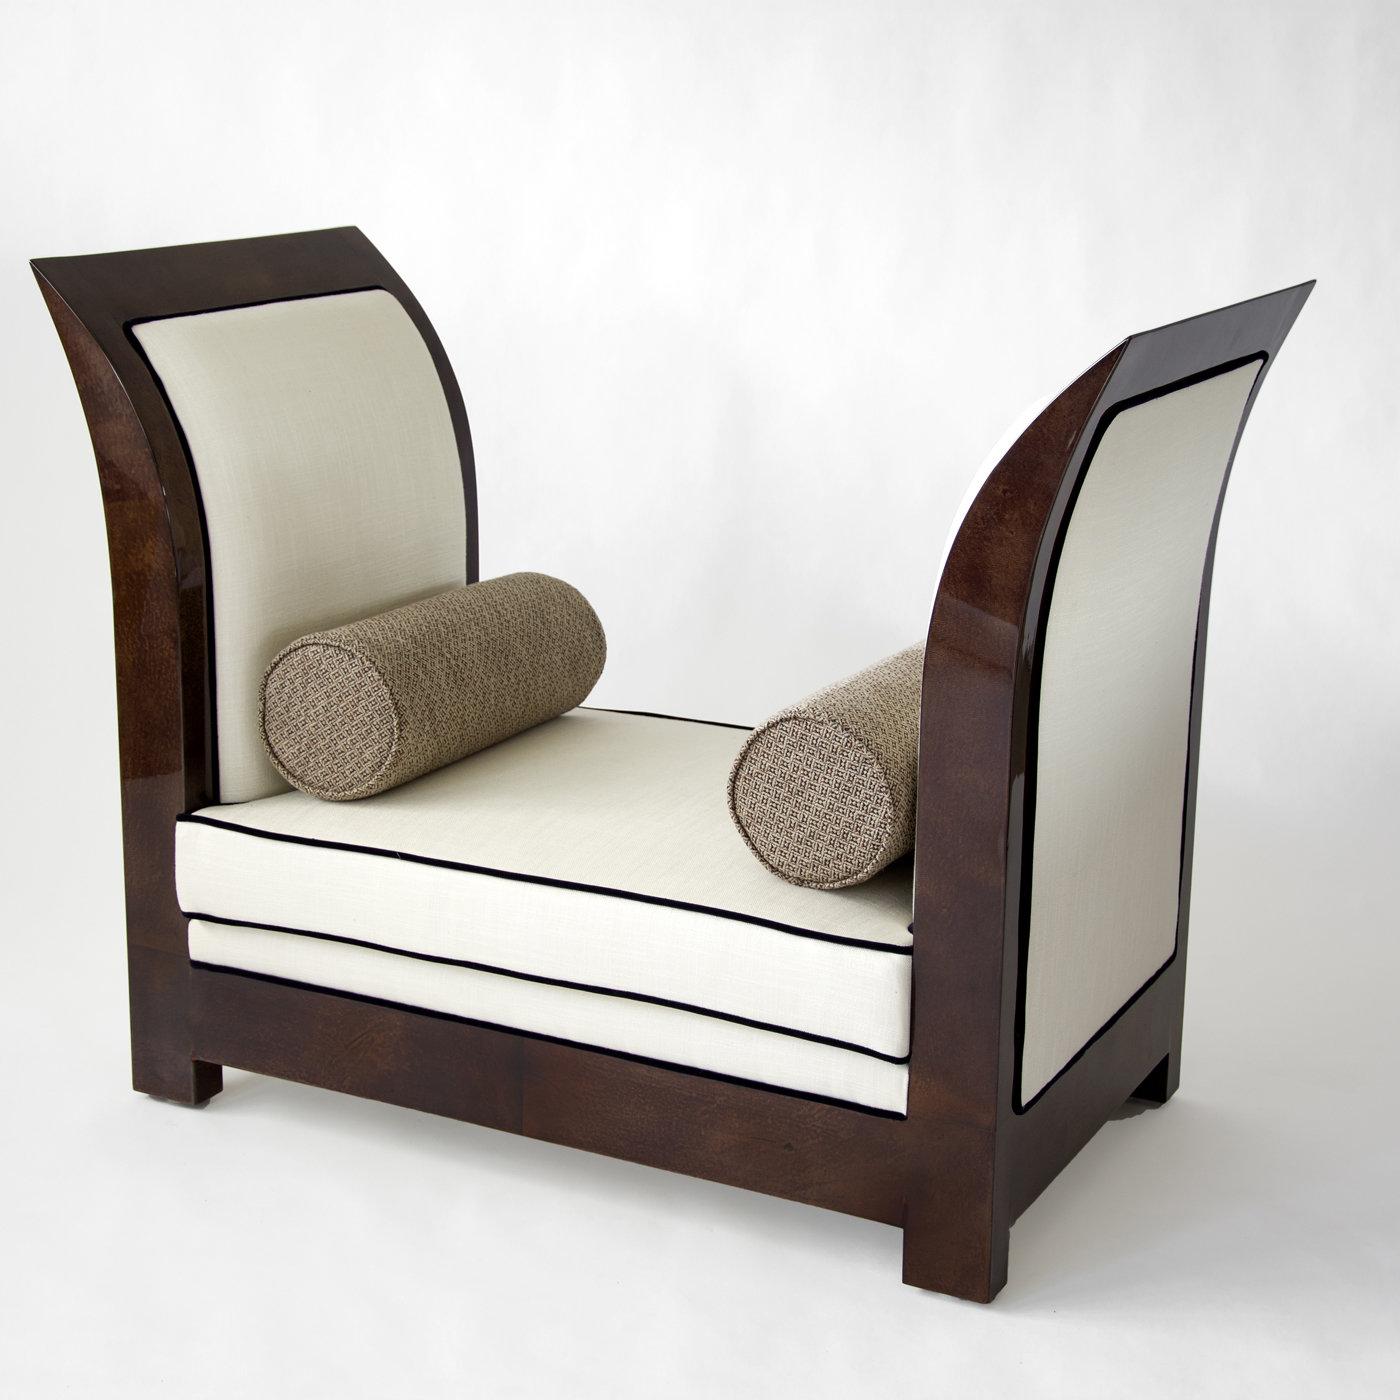 Sculptural and sophisticated, this stunning bench features a rectangular silhouette with tall, curved sides finished with parchment in a matte mocha color (col. 106). The seat cushion and sides (both internal and external) are upholstered in ivory